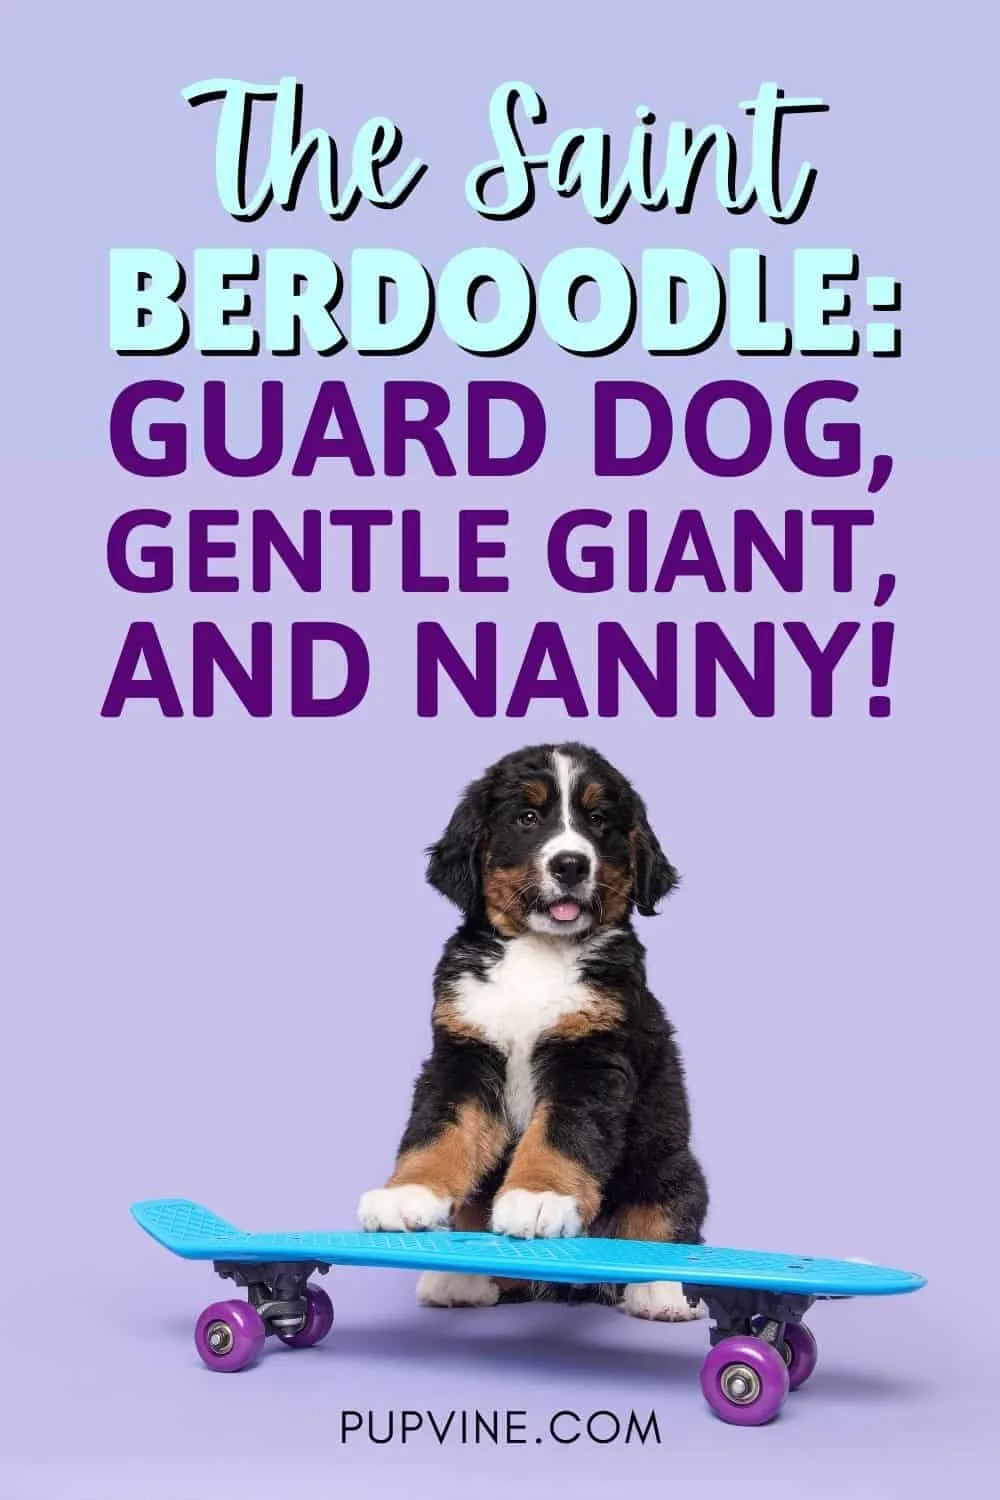 The Saint Berdoodle Guard Dog, Gentle Giant, And Nanny!